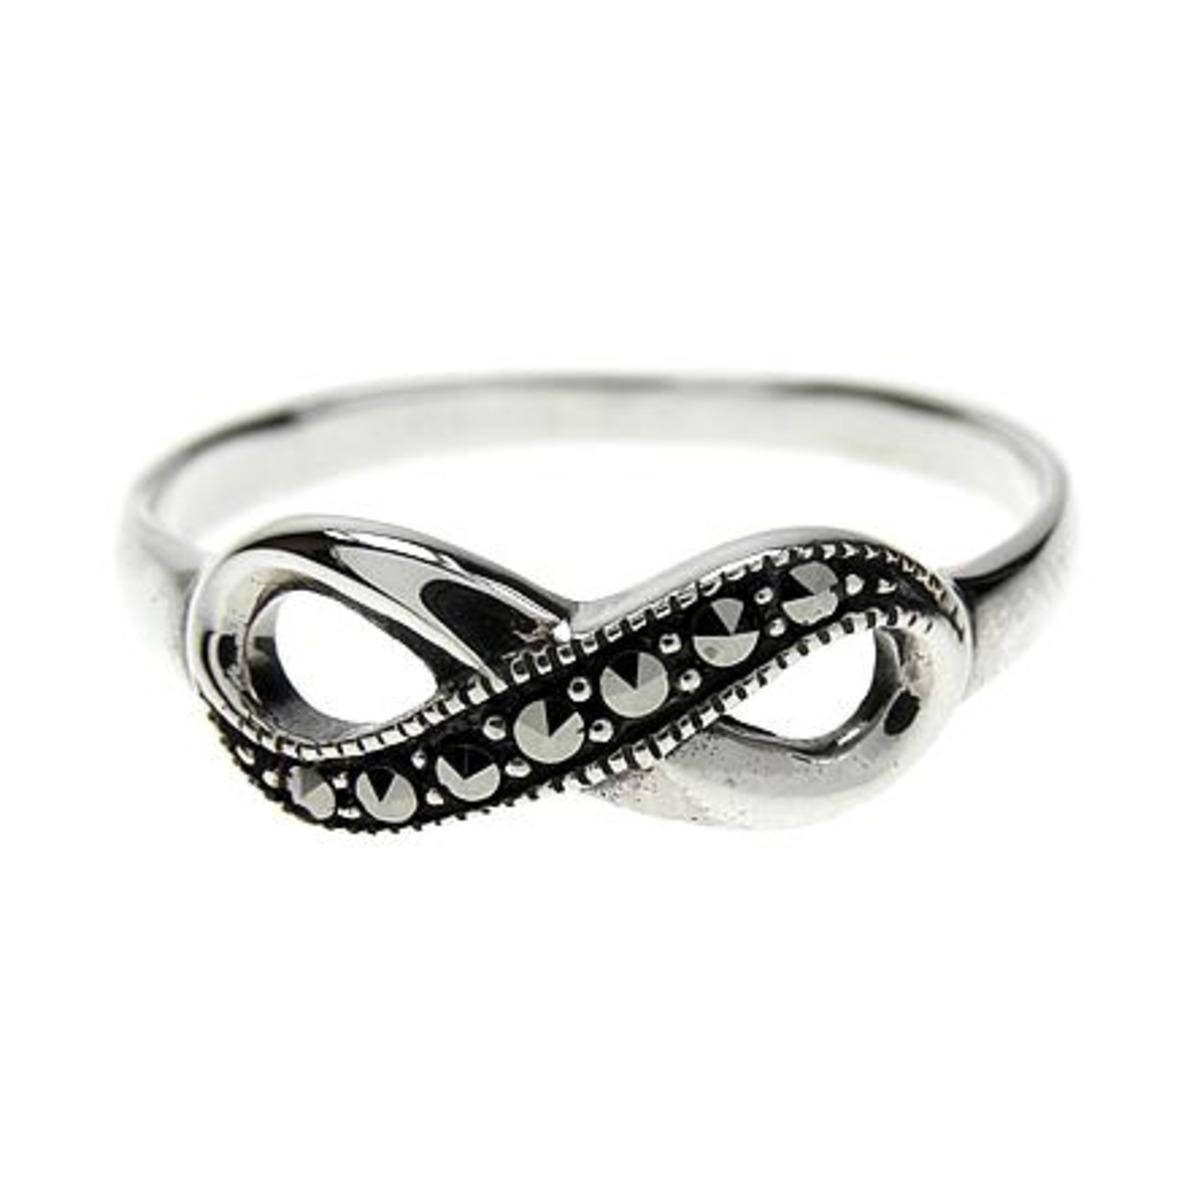 Silver & Marcasite Infinity Ring - Size M